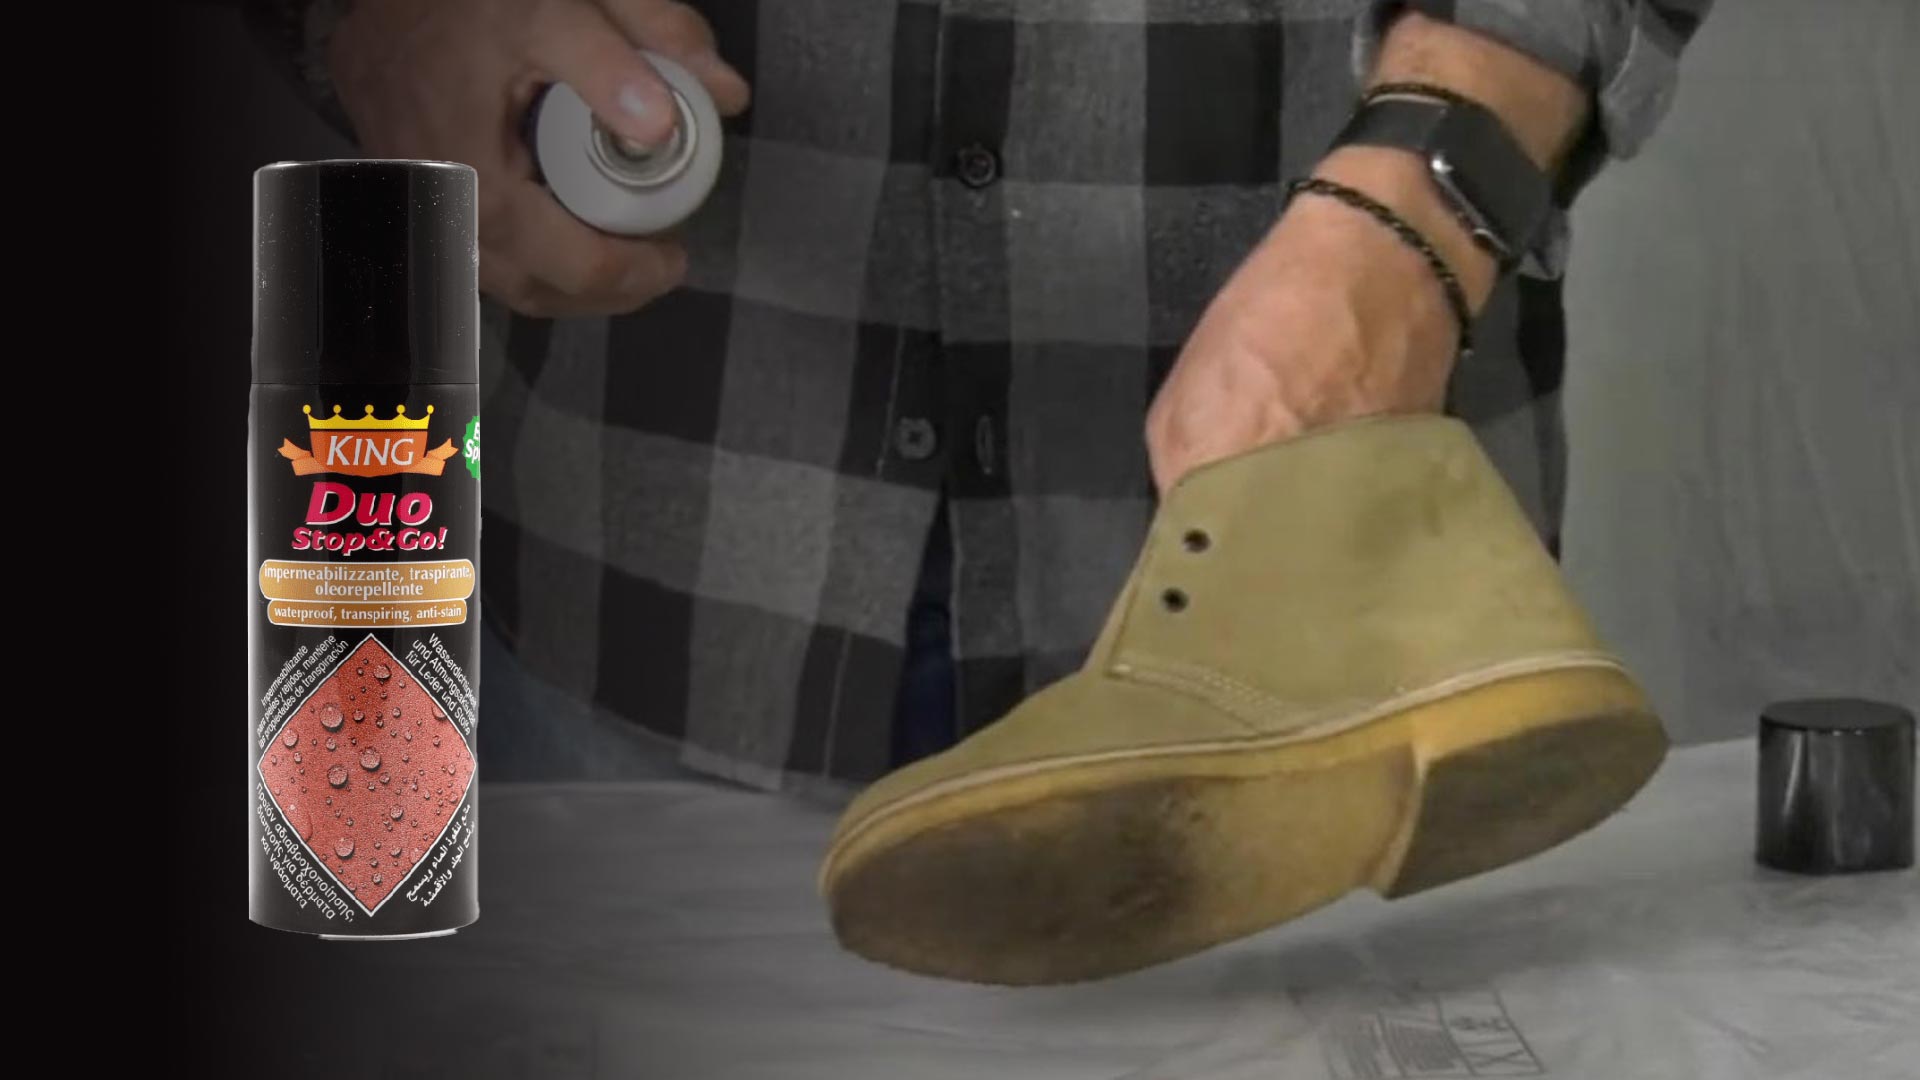 Wilbra - How to waterproof shoes with King Duo spray